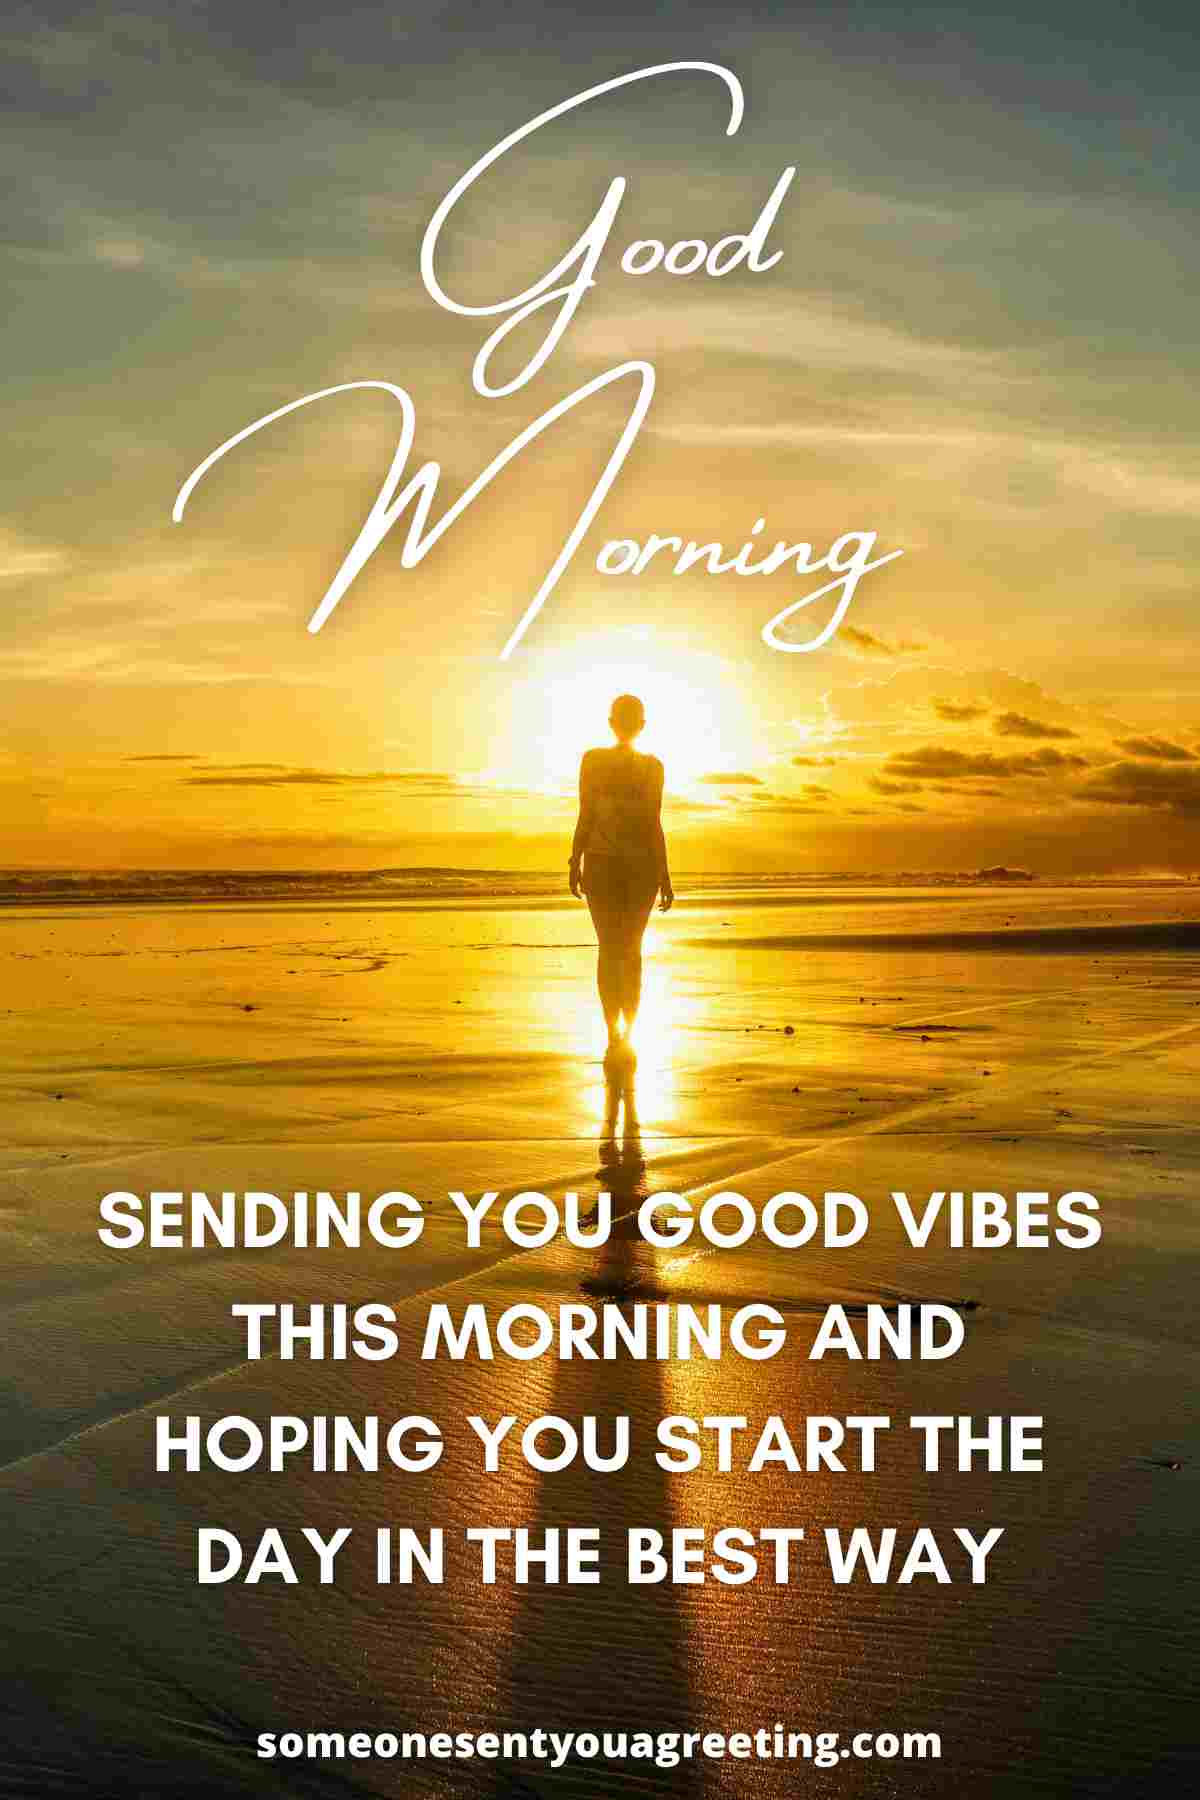 hoping you start the day well message